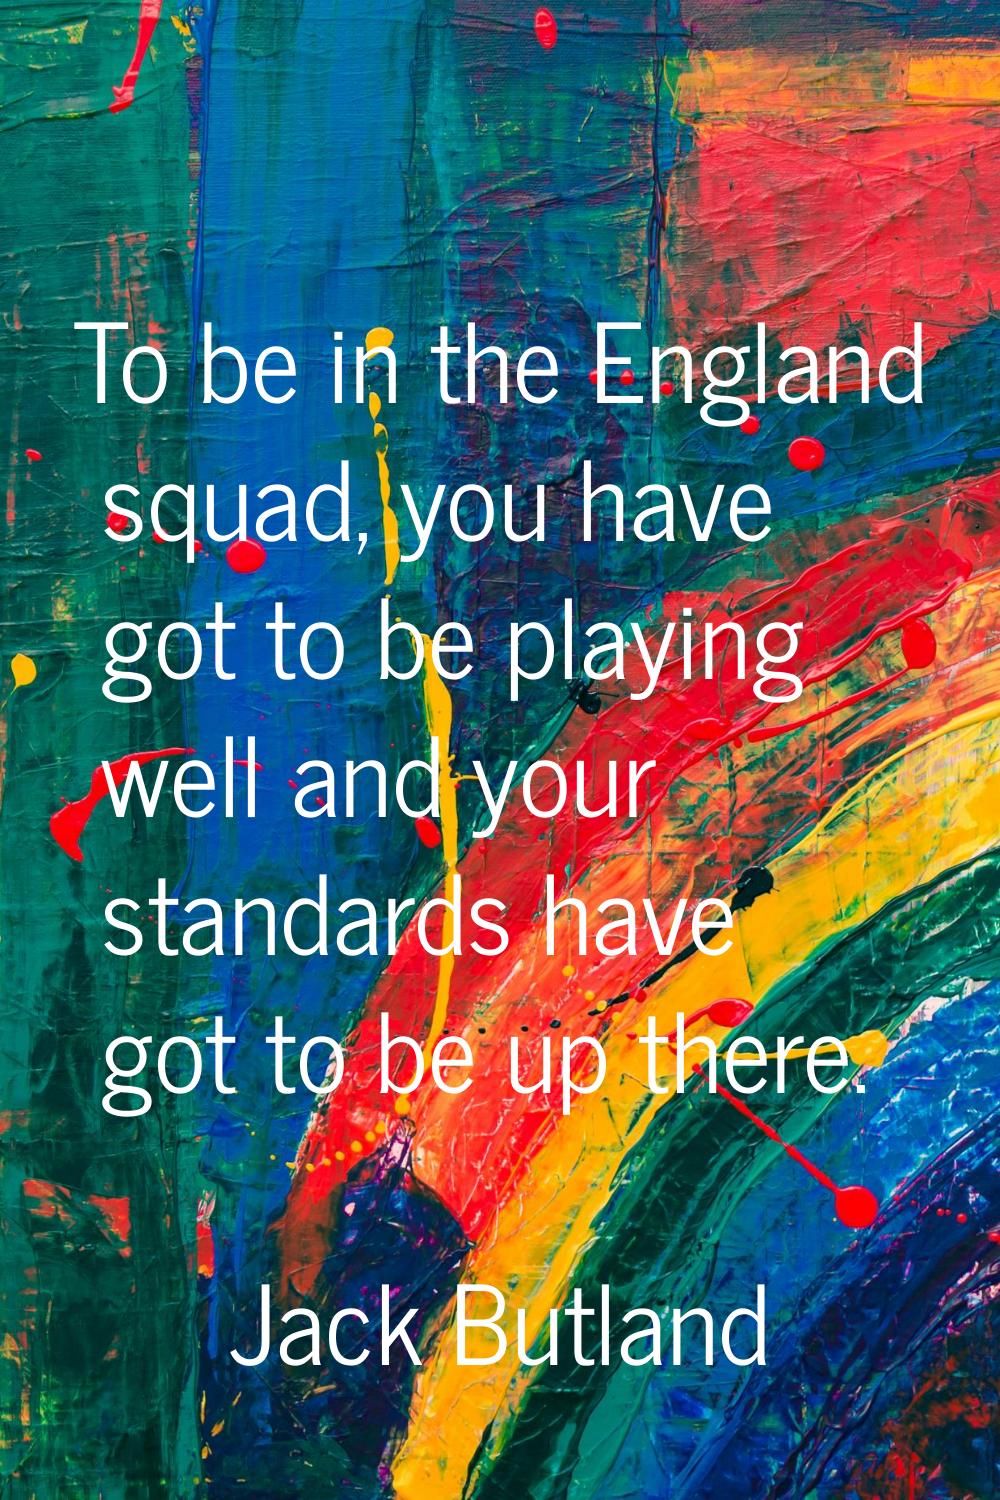 To be in the England squad, you have got to be playing well and your standards have got to be up th